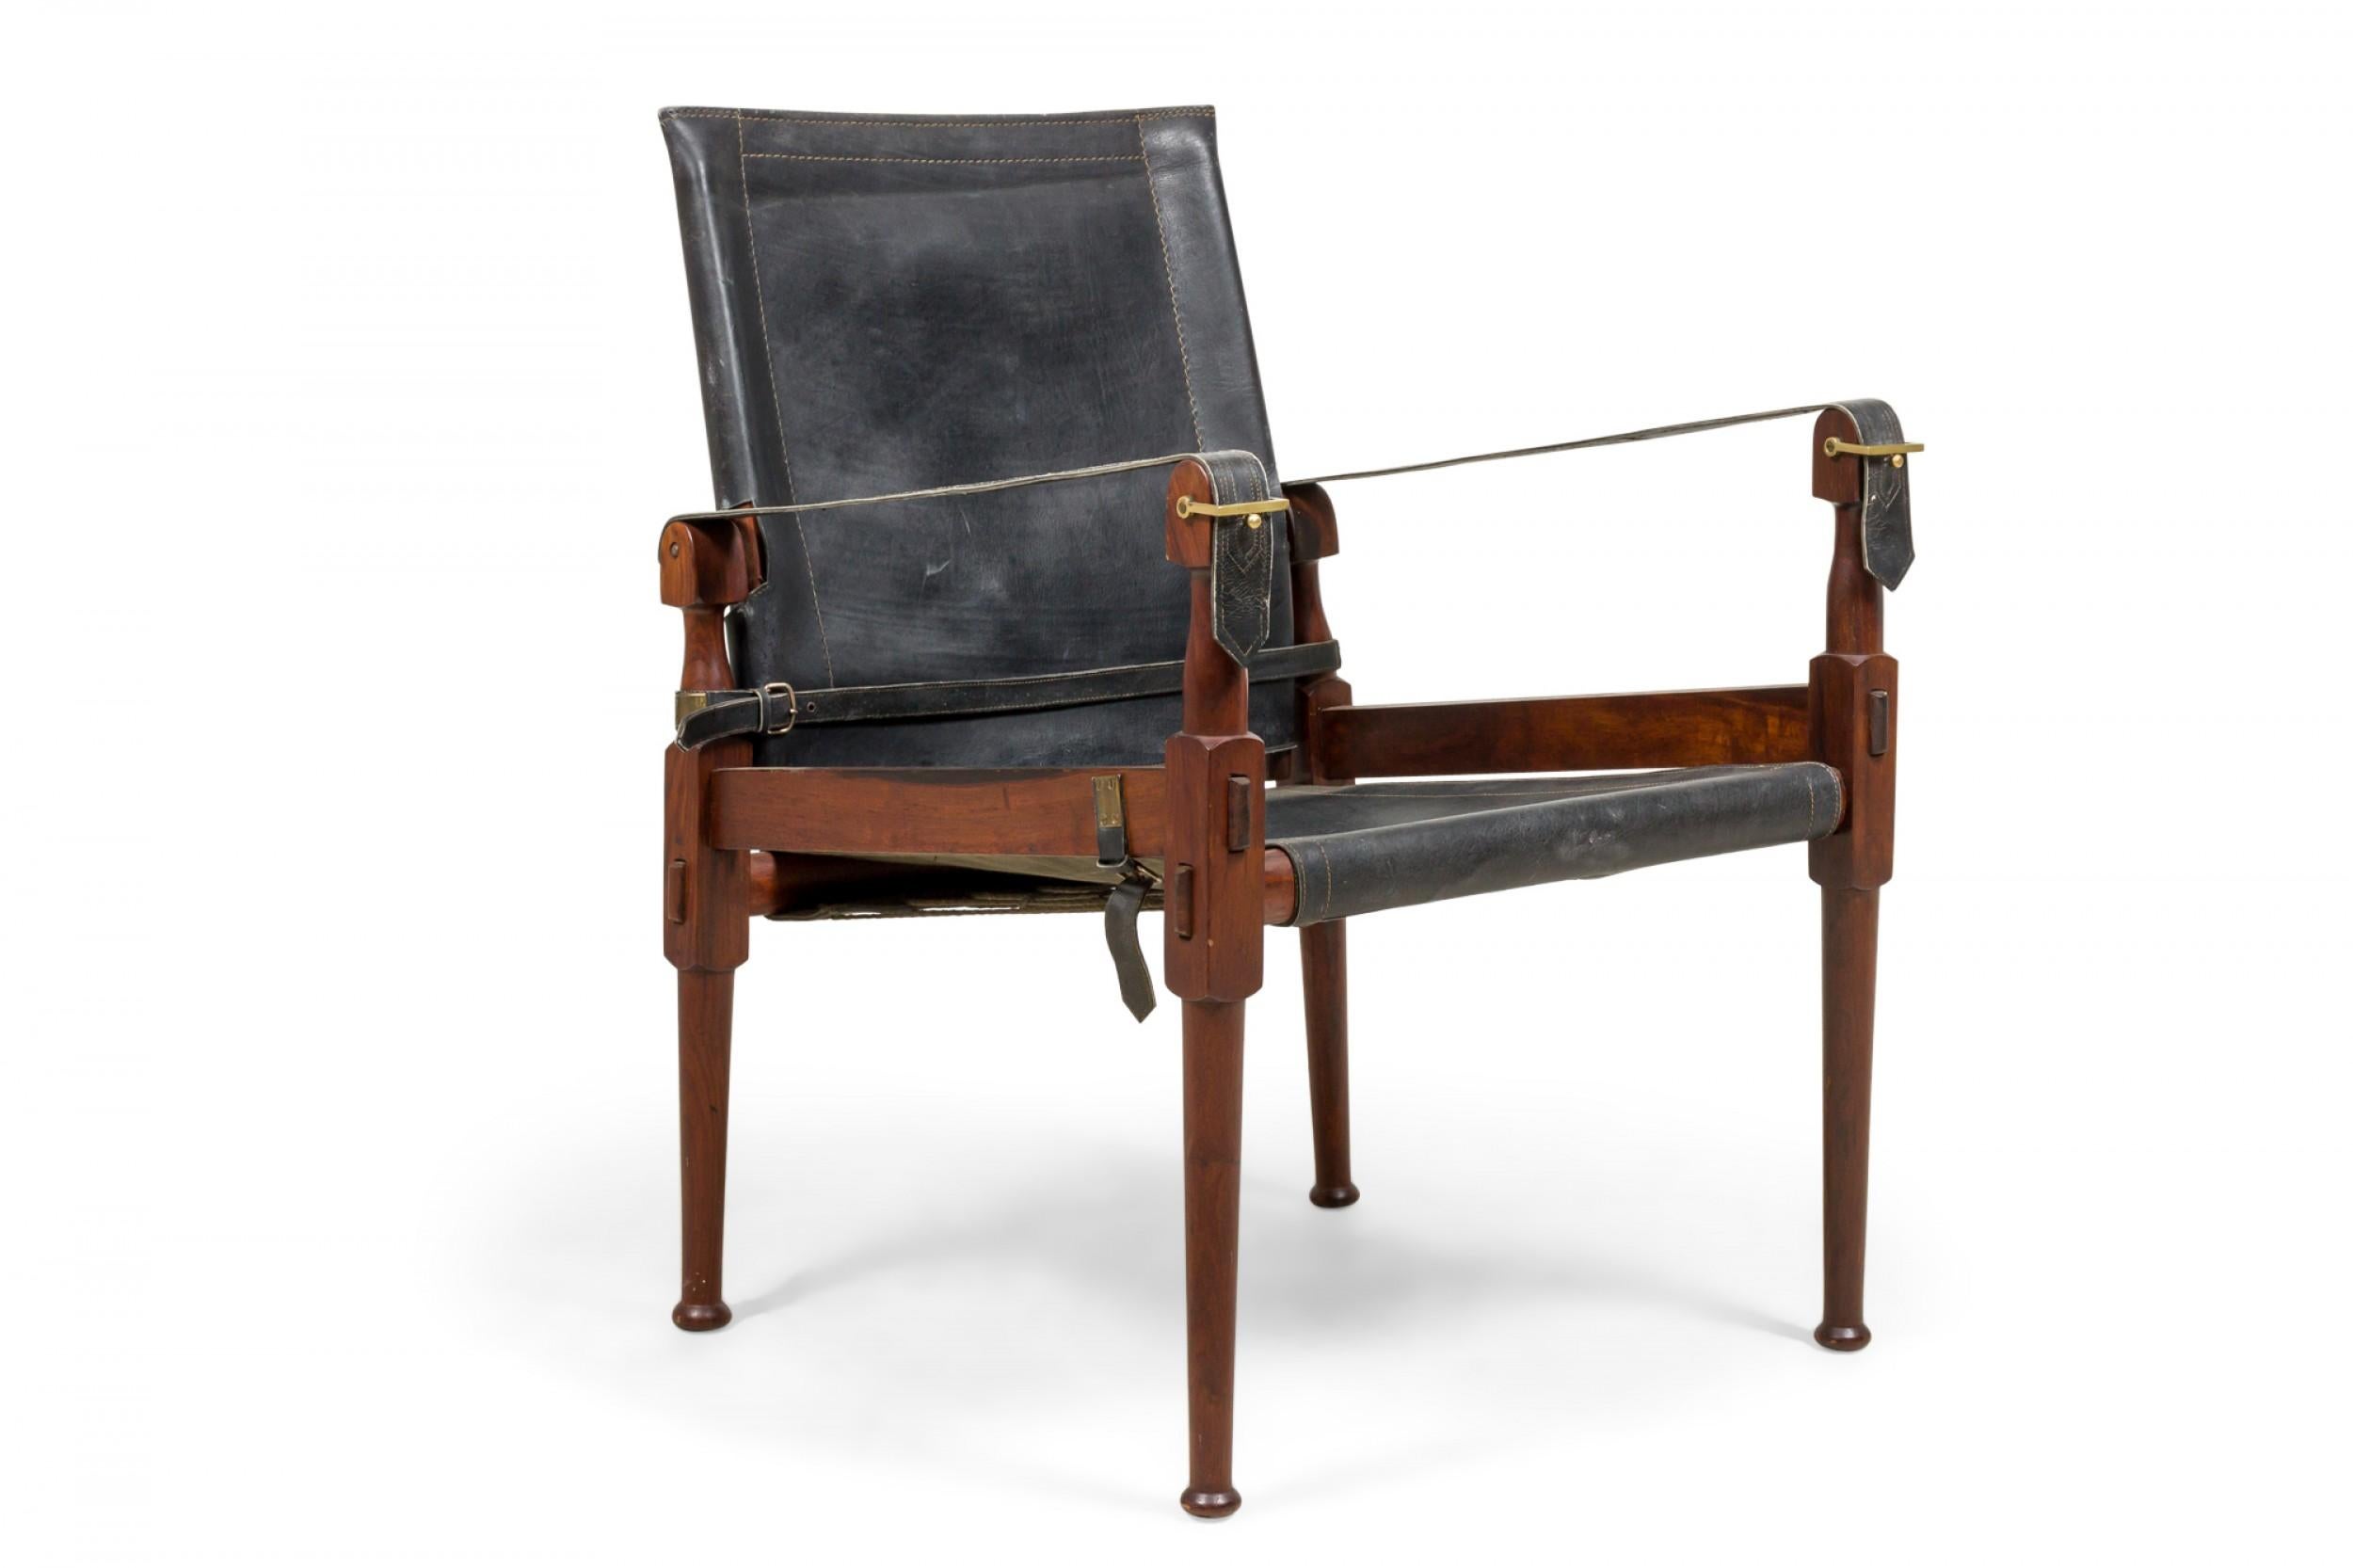 Pairof Pakistani mid-century 'Roorkee' safari campaign chairs with carved walnut frames and black leather sling seats, backs and arms that collapse down to a portable form. (M. Hayat & Bros Ltd.).
 